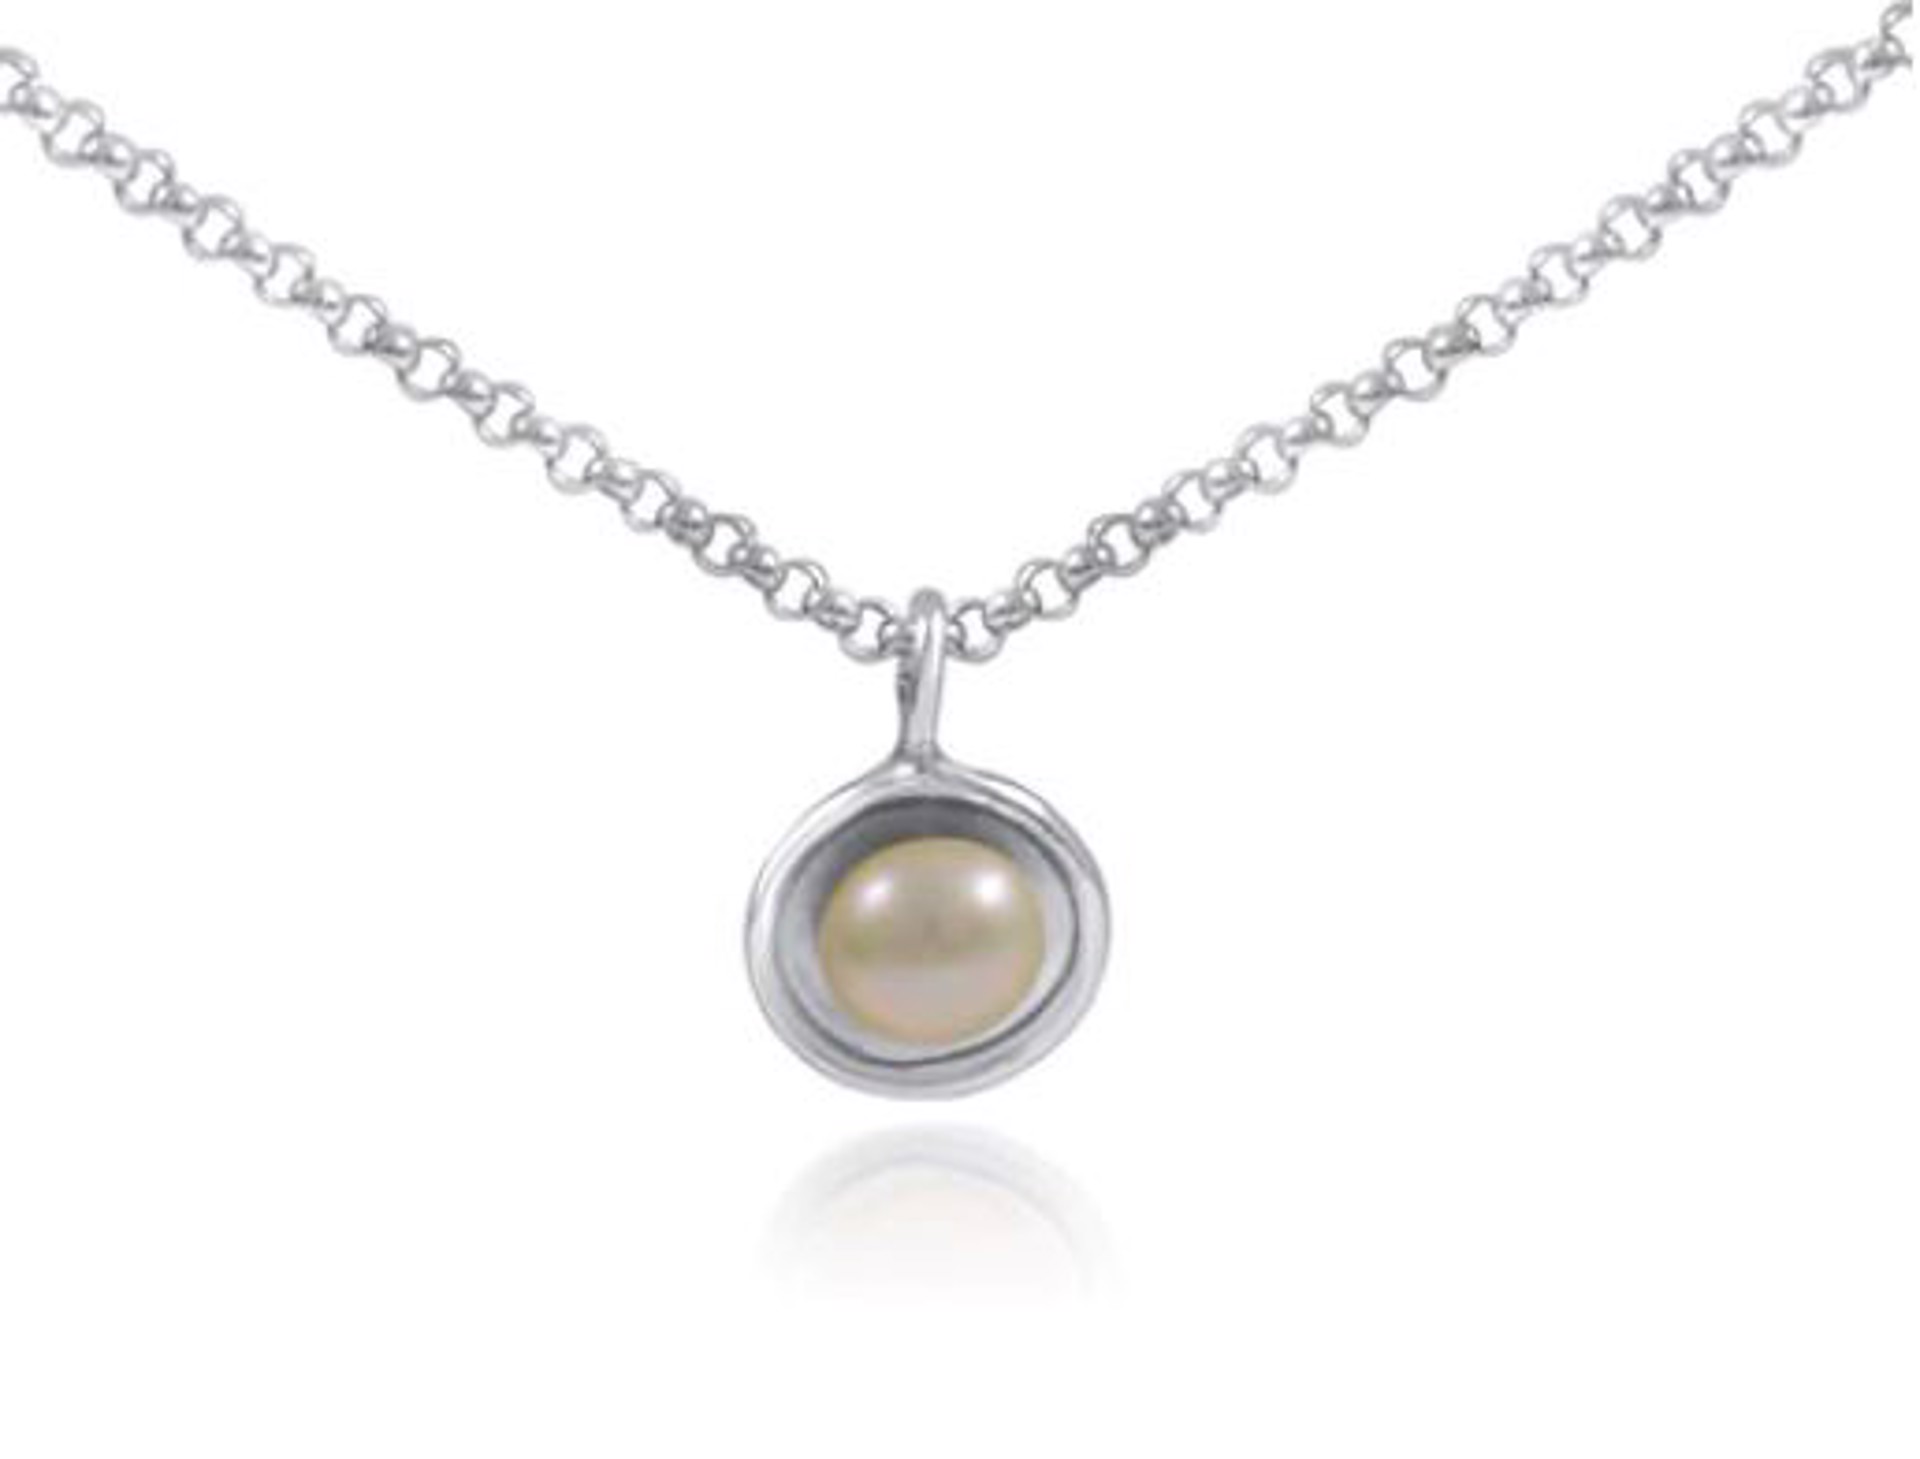 Mini Pearl Necklace by Kristen Baird